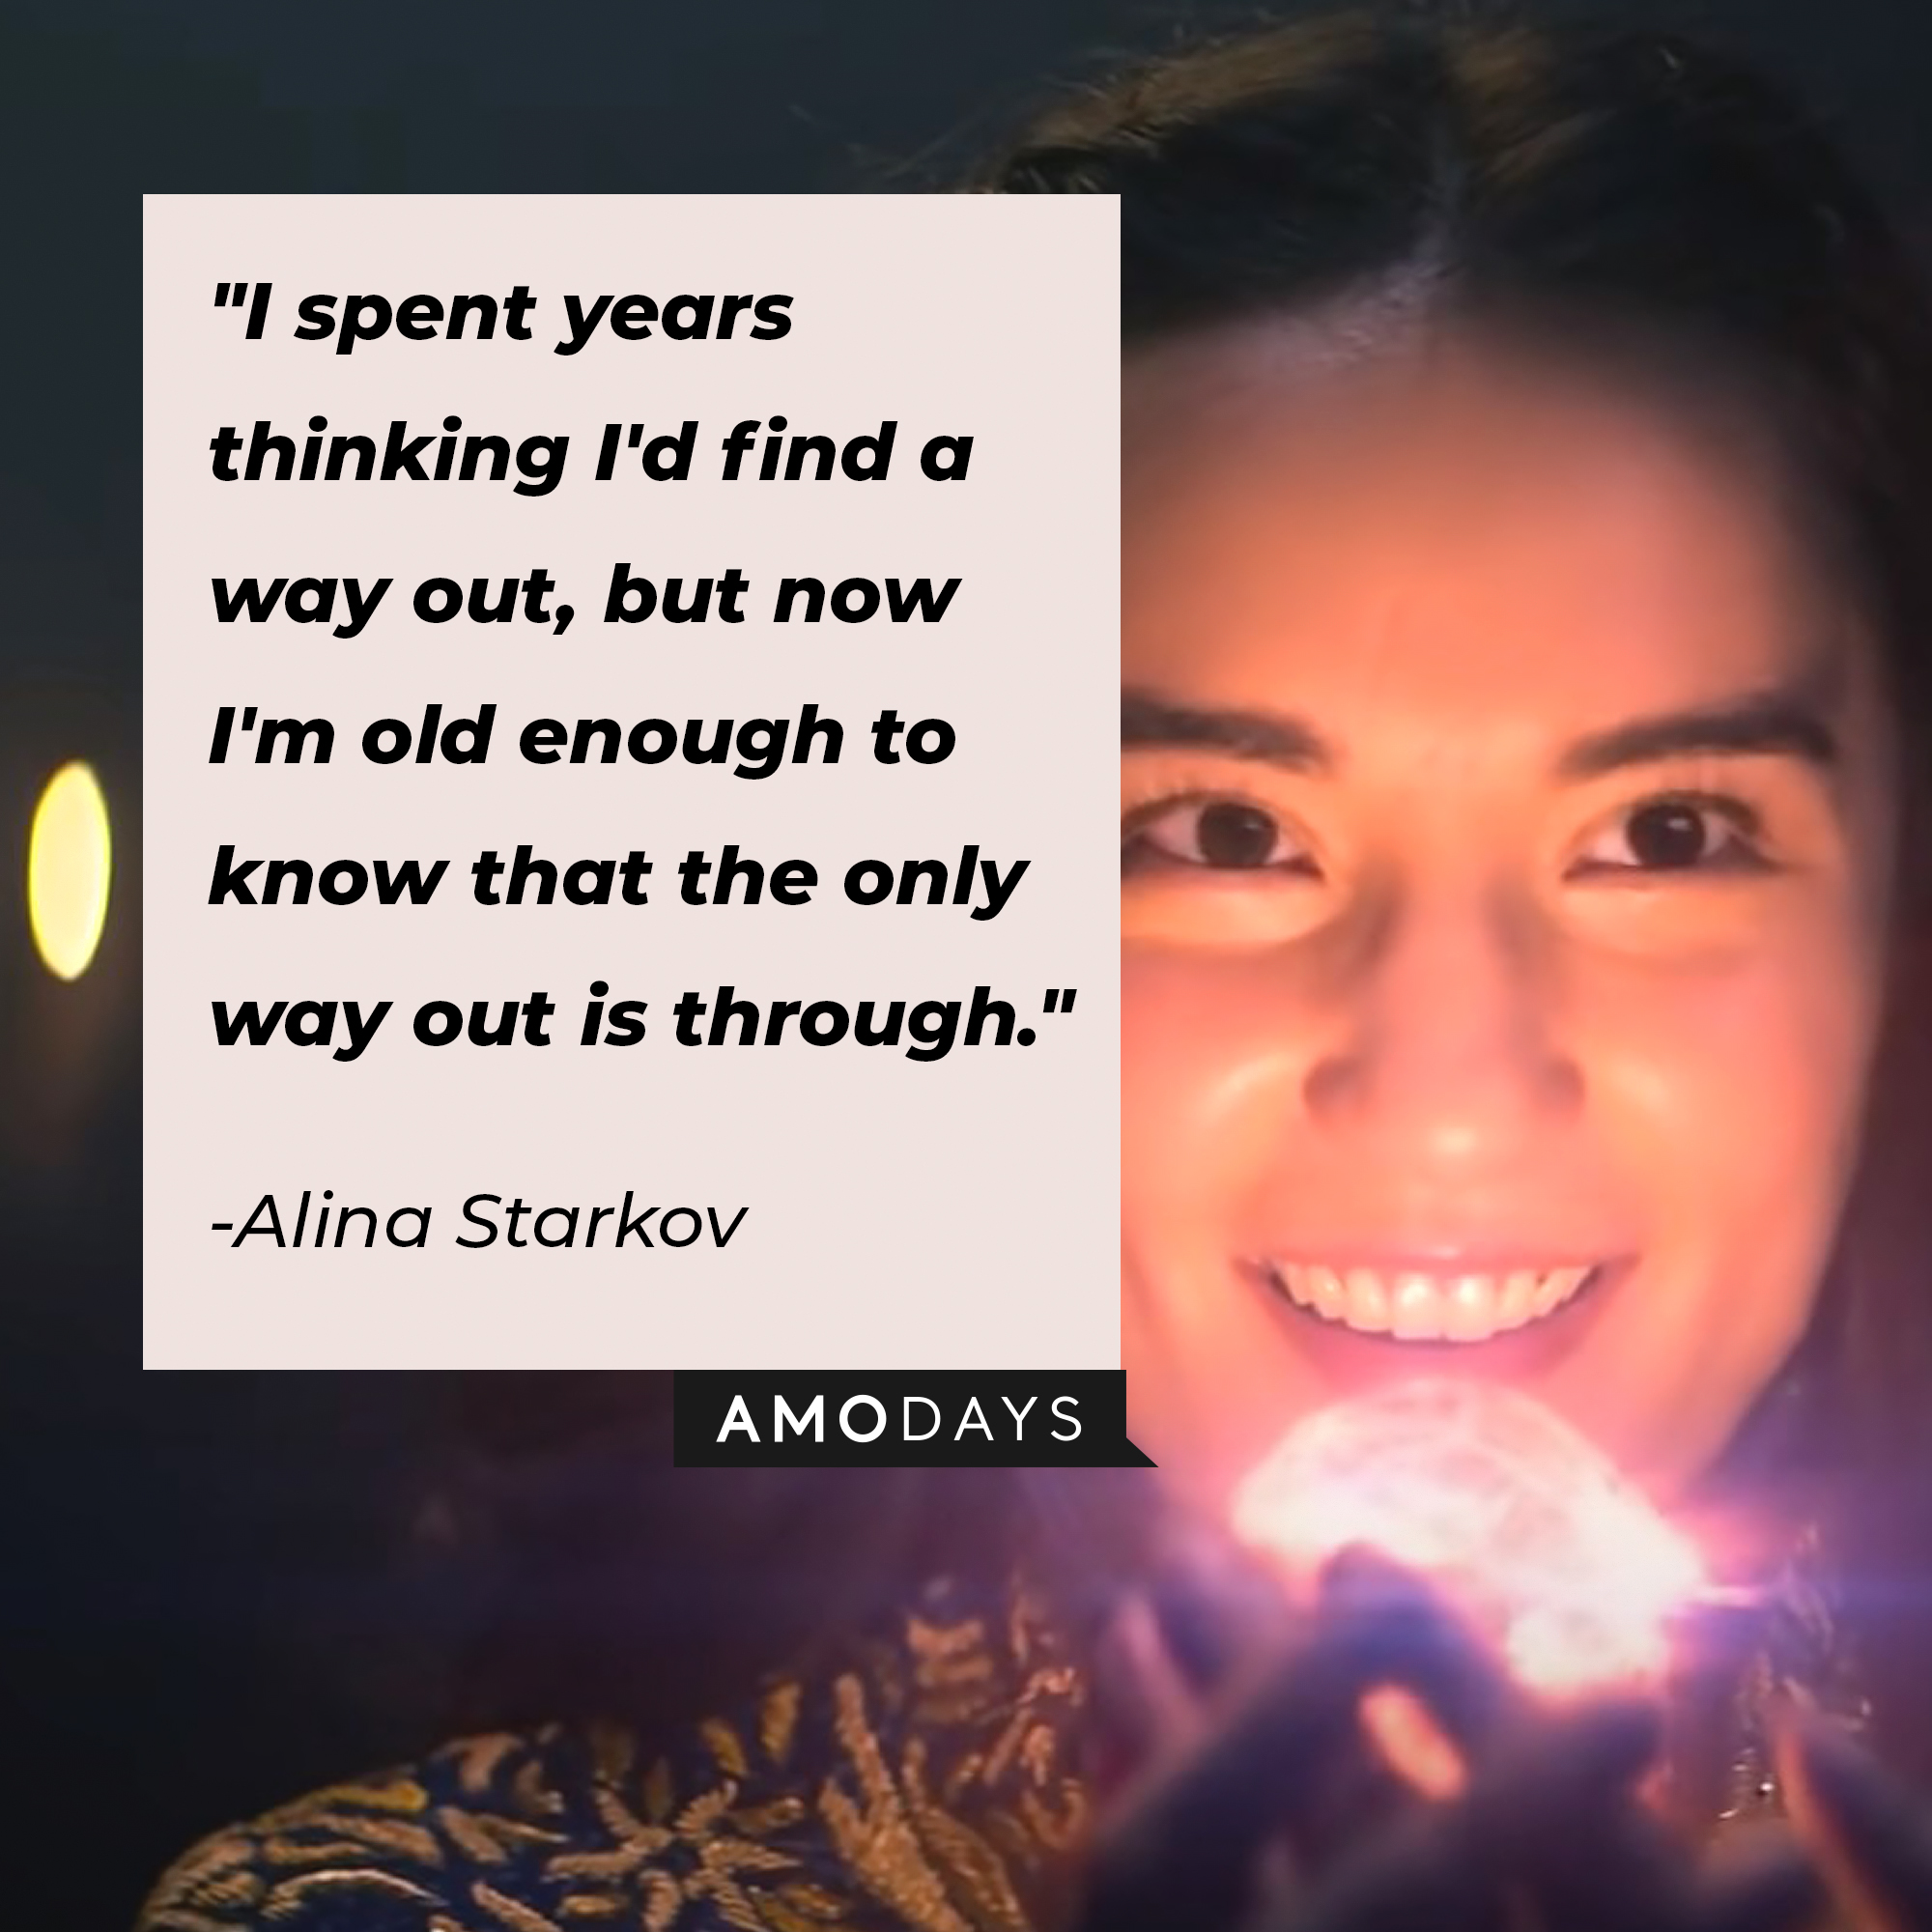 Alina Starkov's quote: "I spent years thinking I'd find a way out, but now I'm old enough to know that the only way out is through." | Image: AmoDays